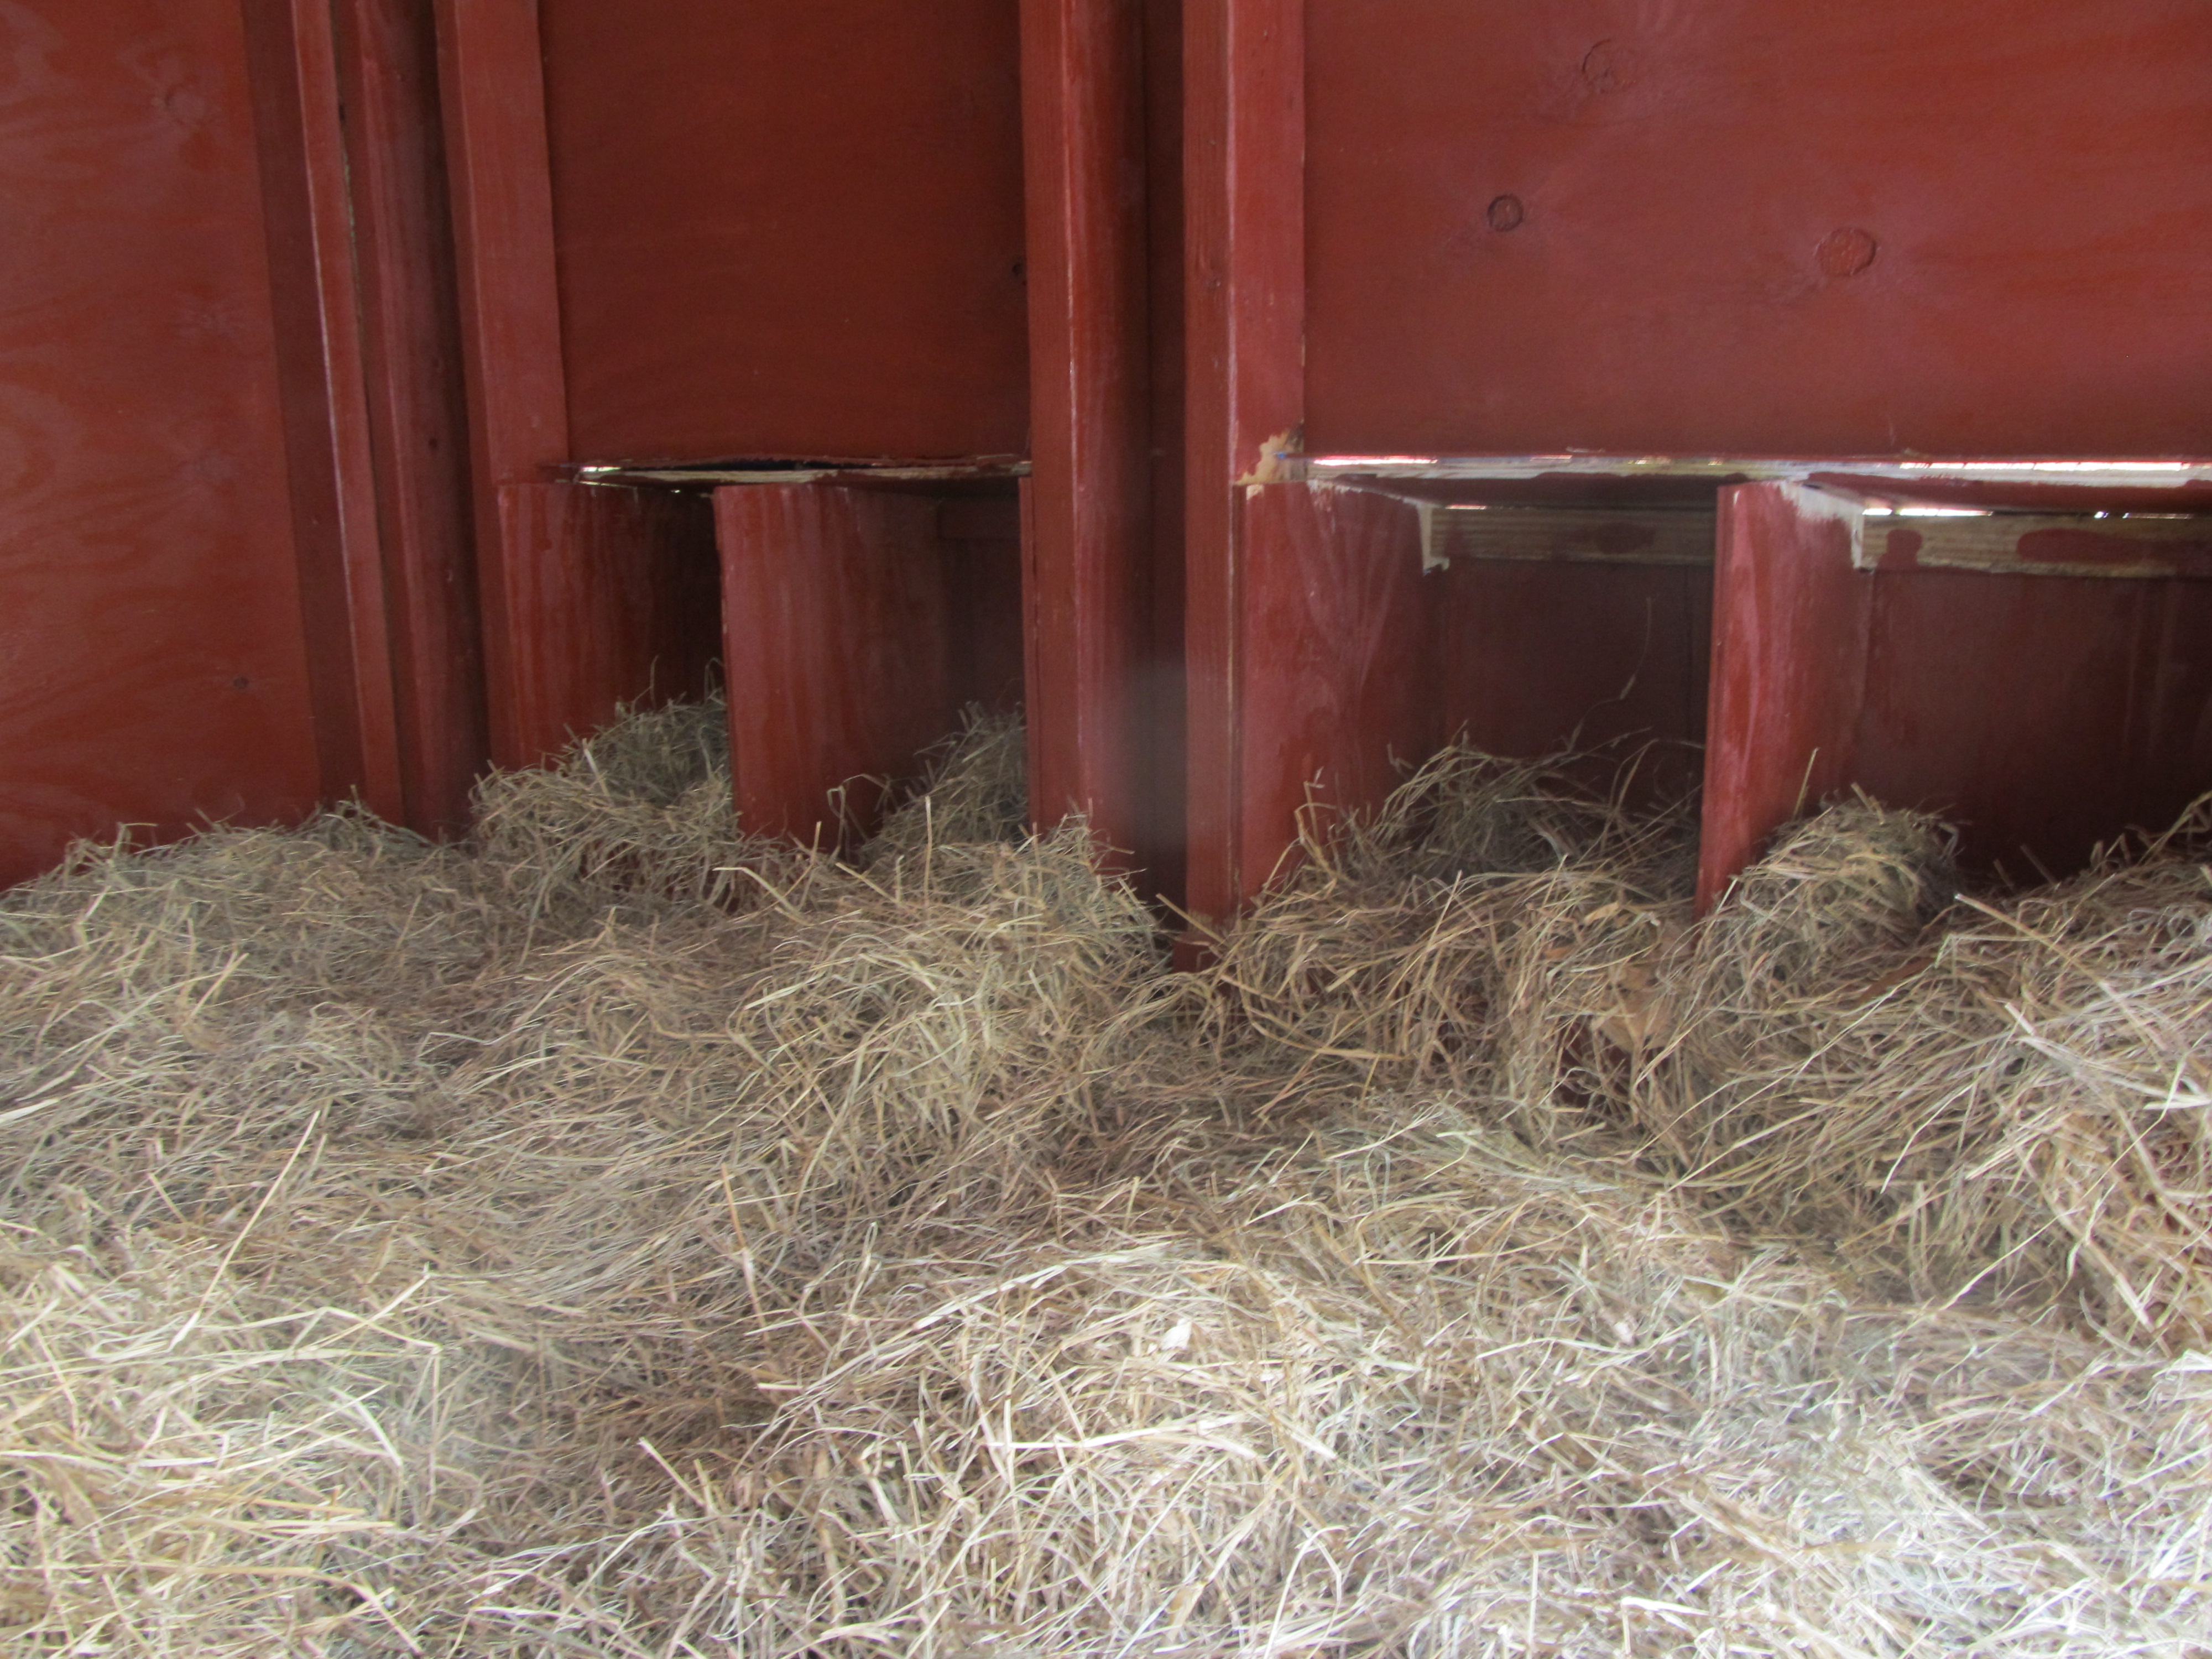 Nesting boxes inside coop for laying hens